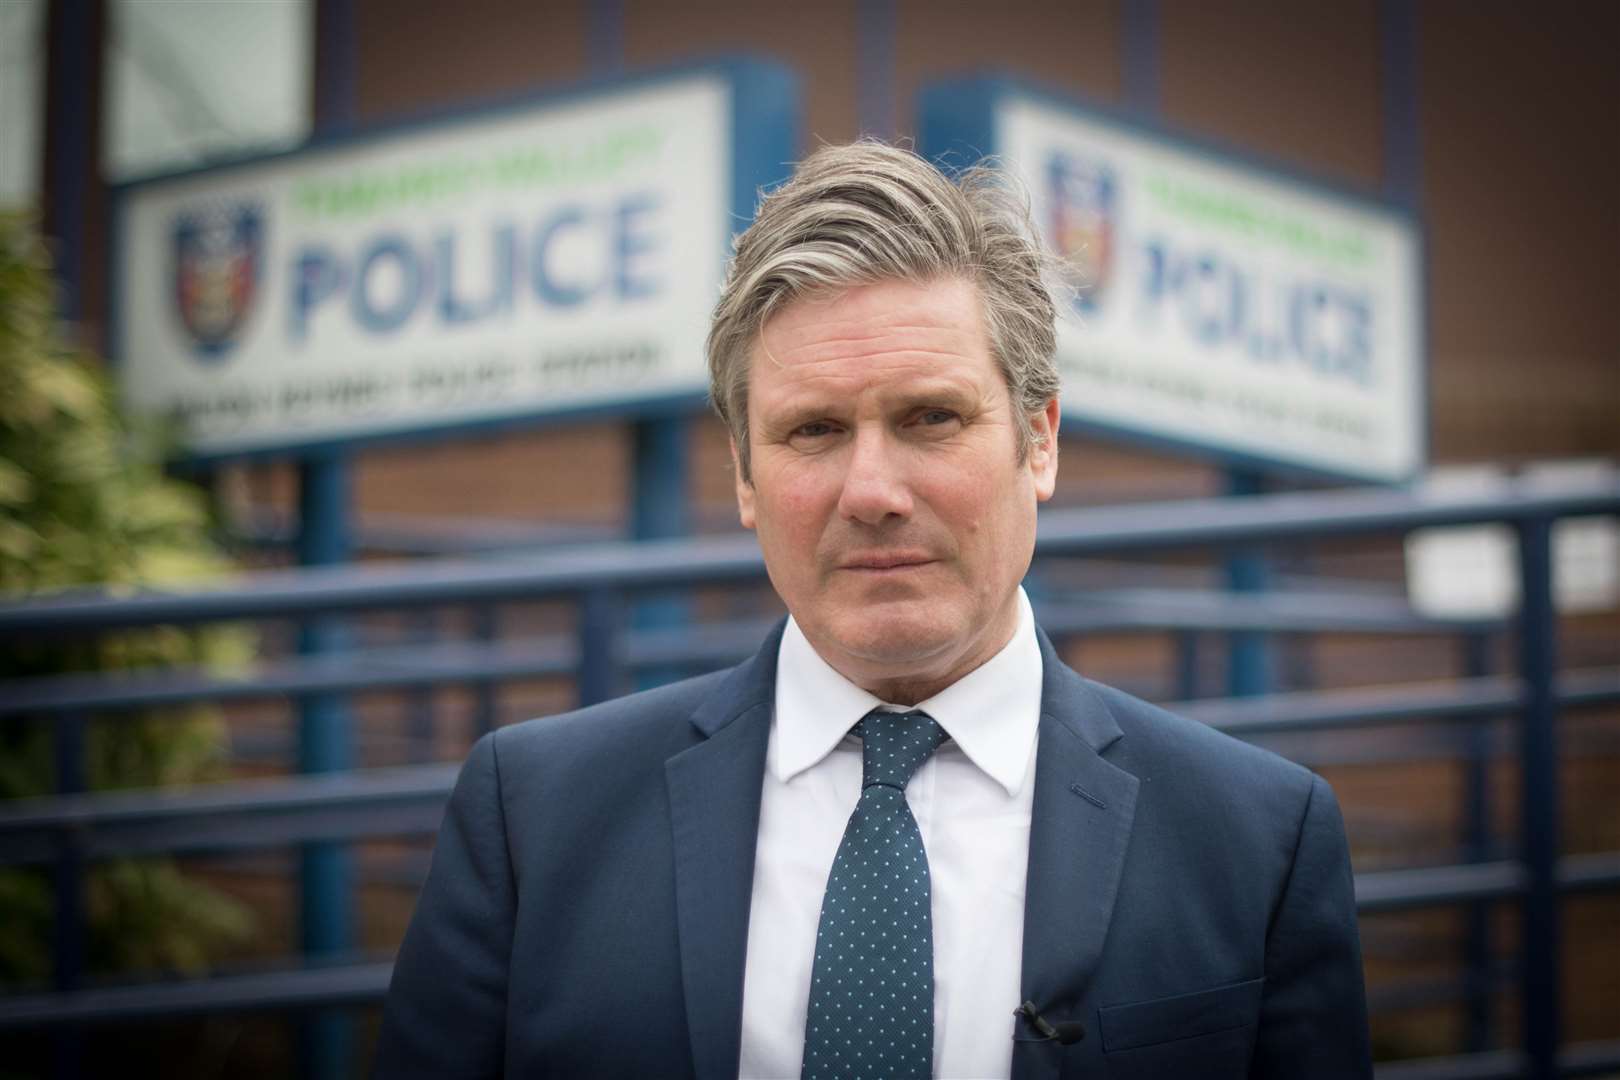 Labour leader Sir Keir Starmer during a visit to Milton Keynes police station (Stefan Rousseau/PA)